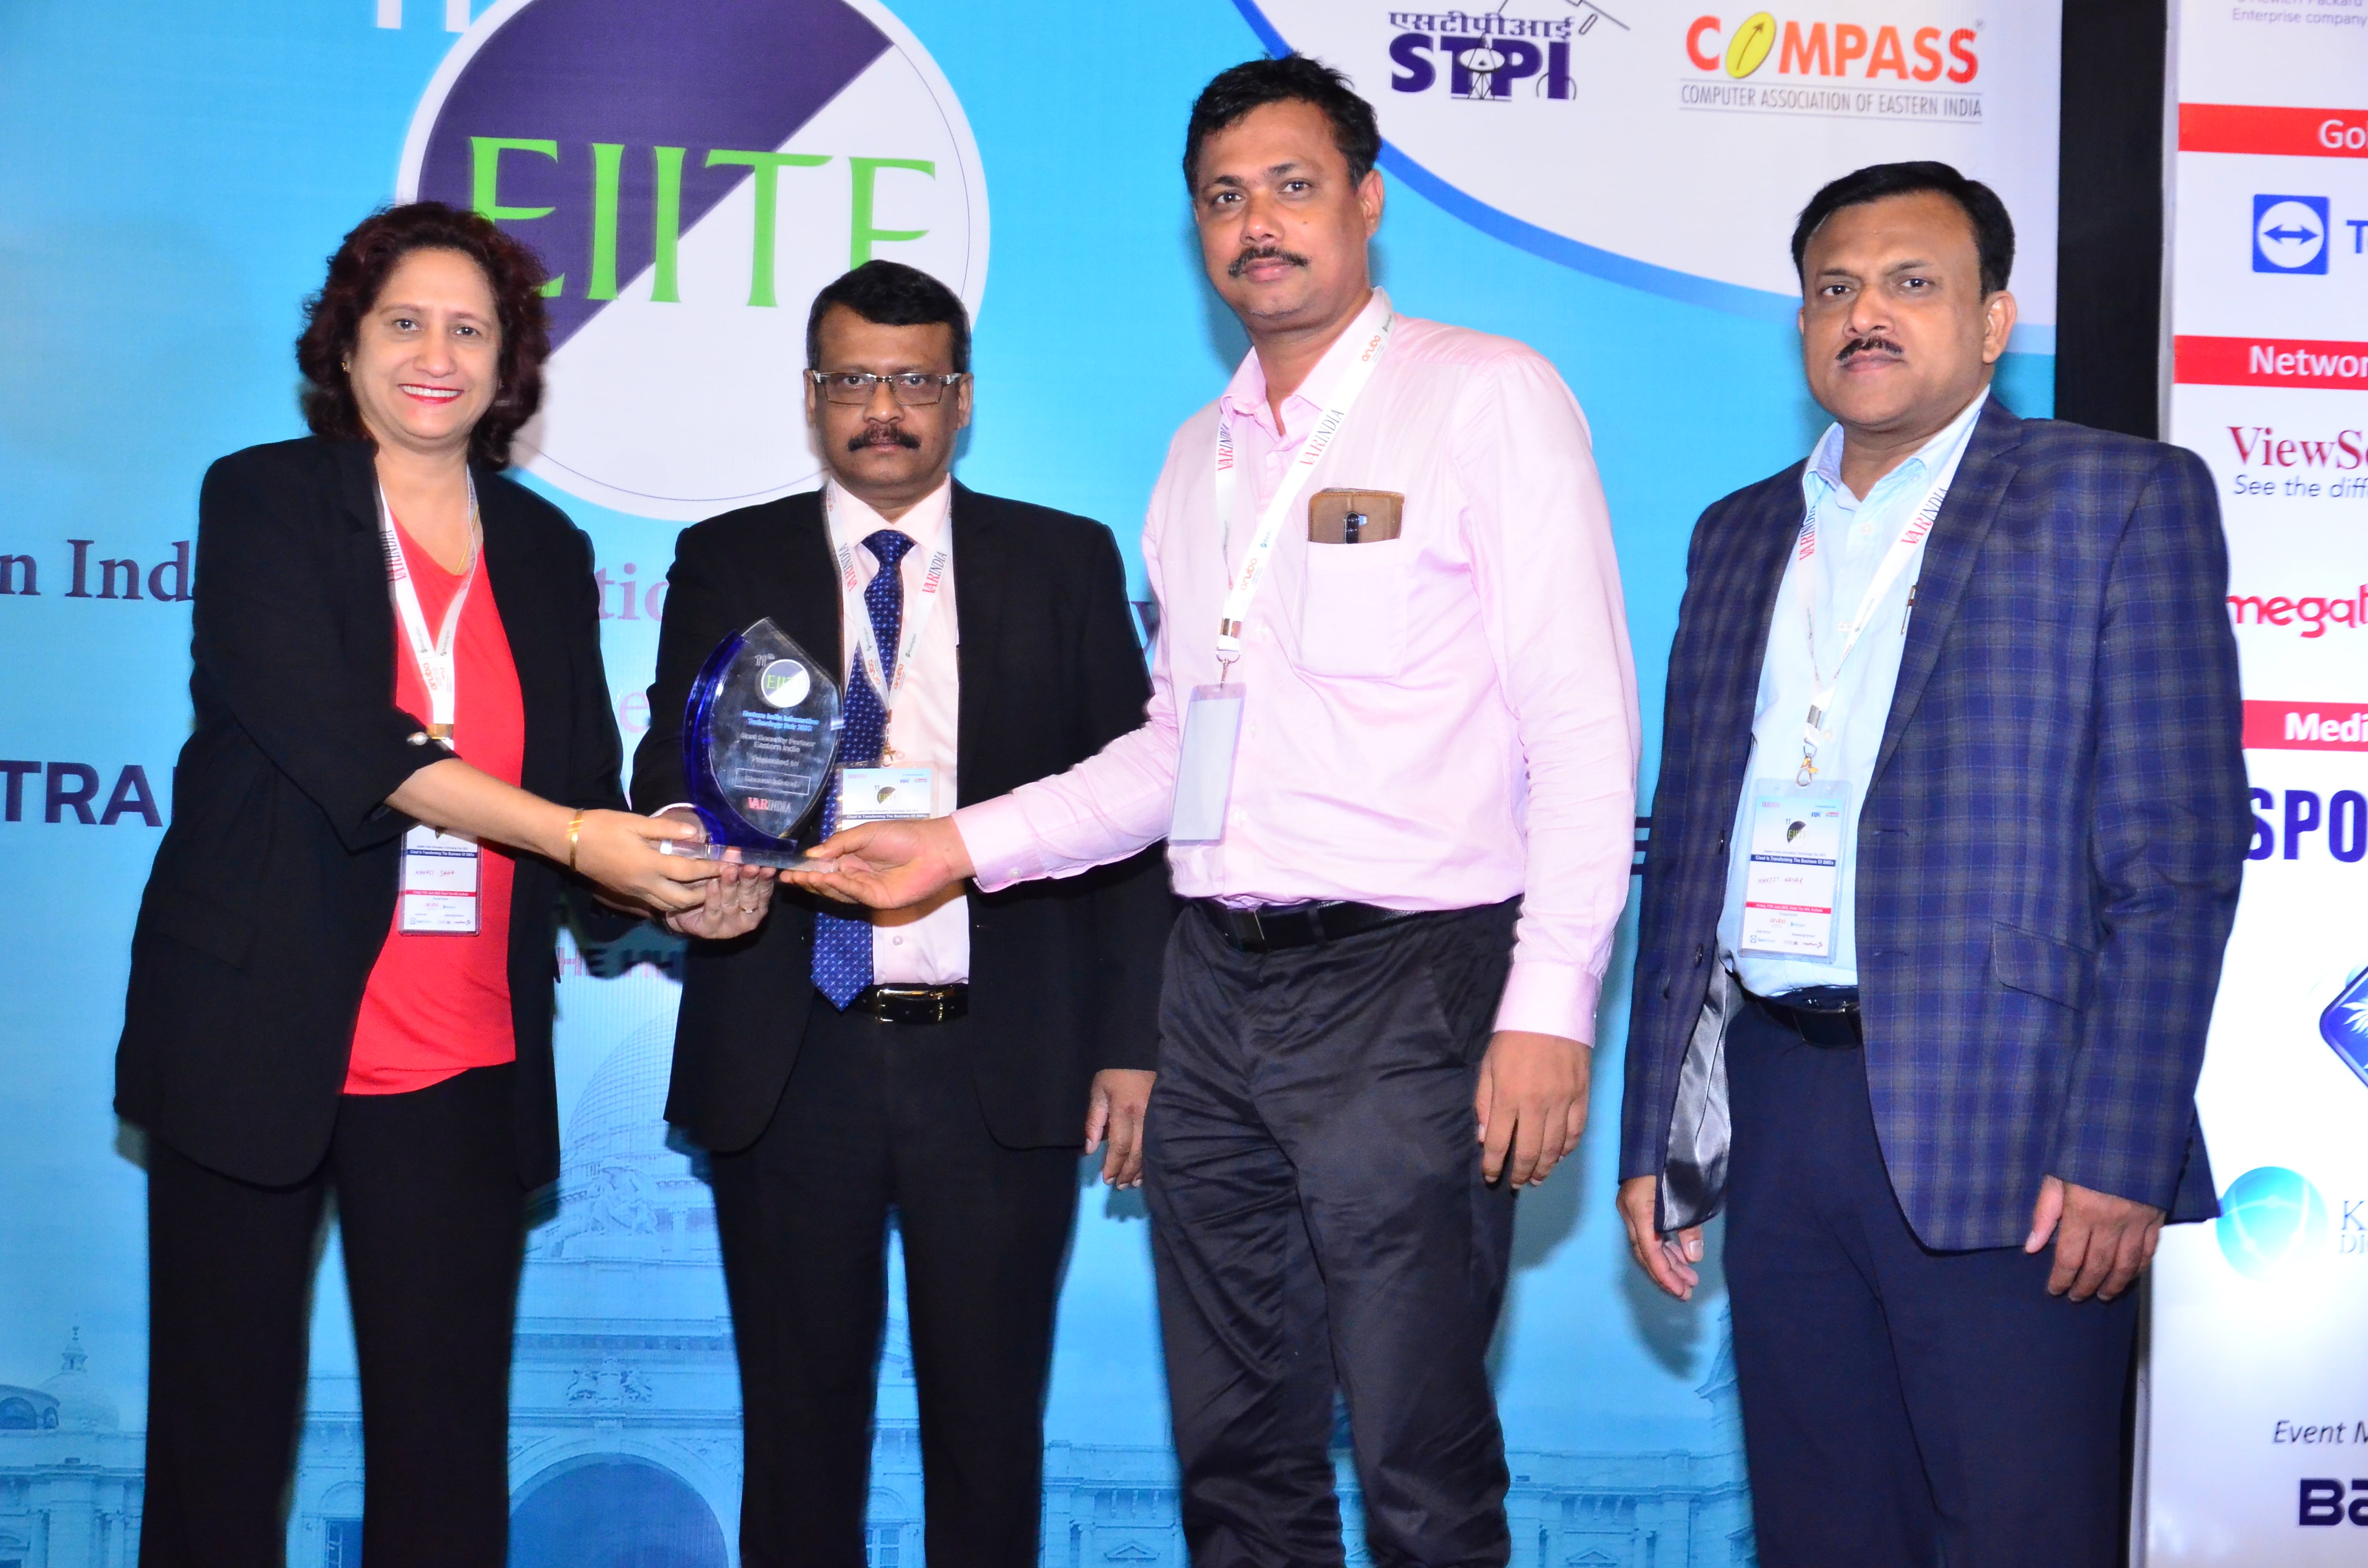 Best Security Partner, Eastern India went to Macaws Infotech